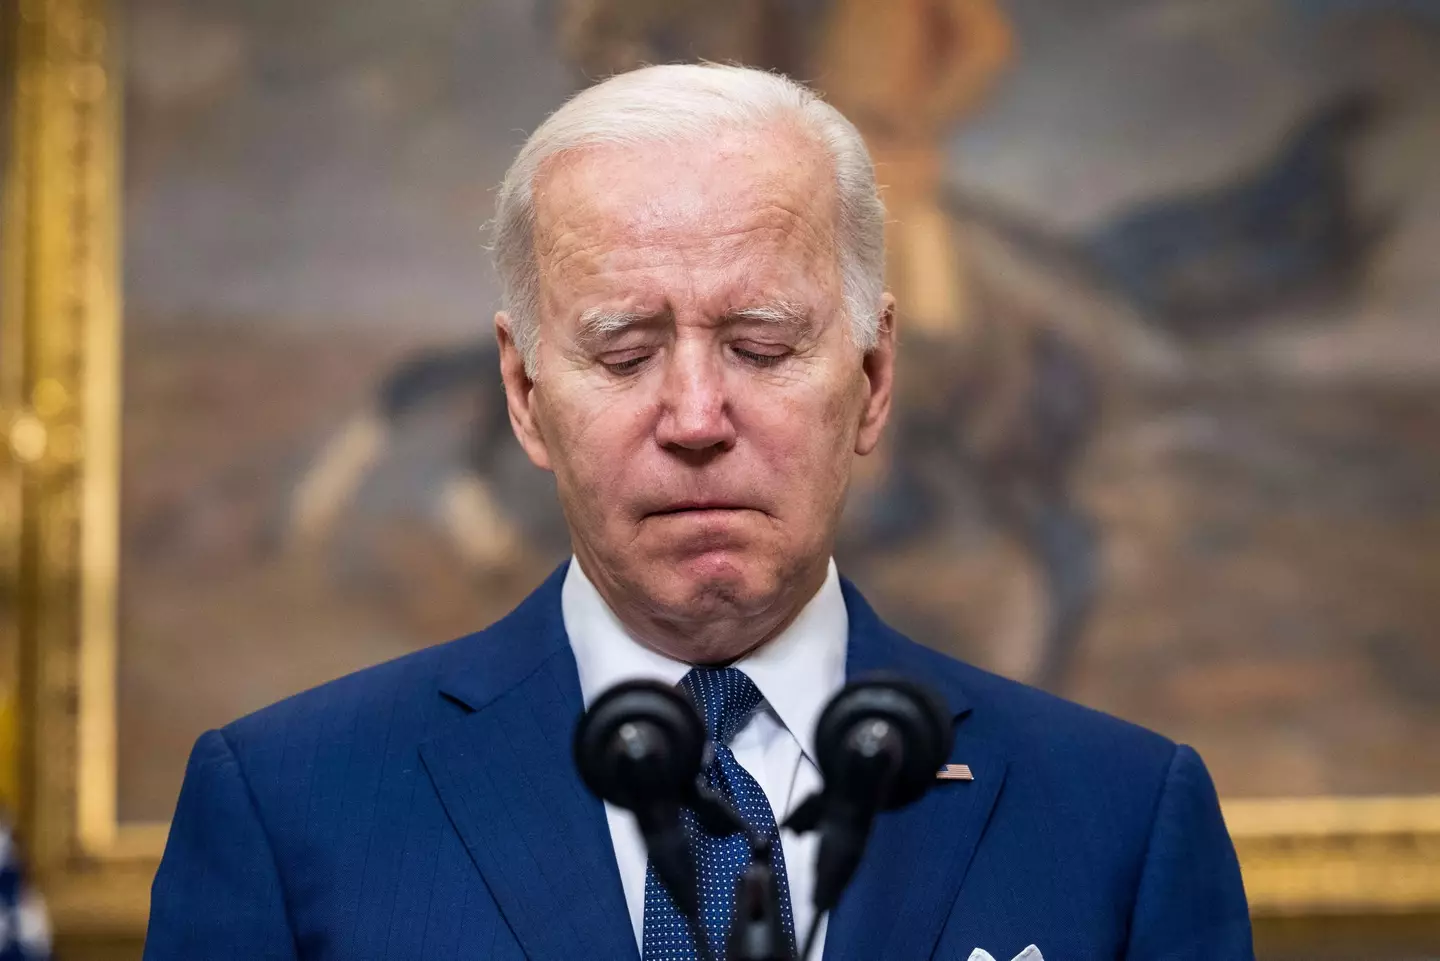 An anguished Biden spoke to the press.